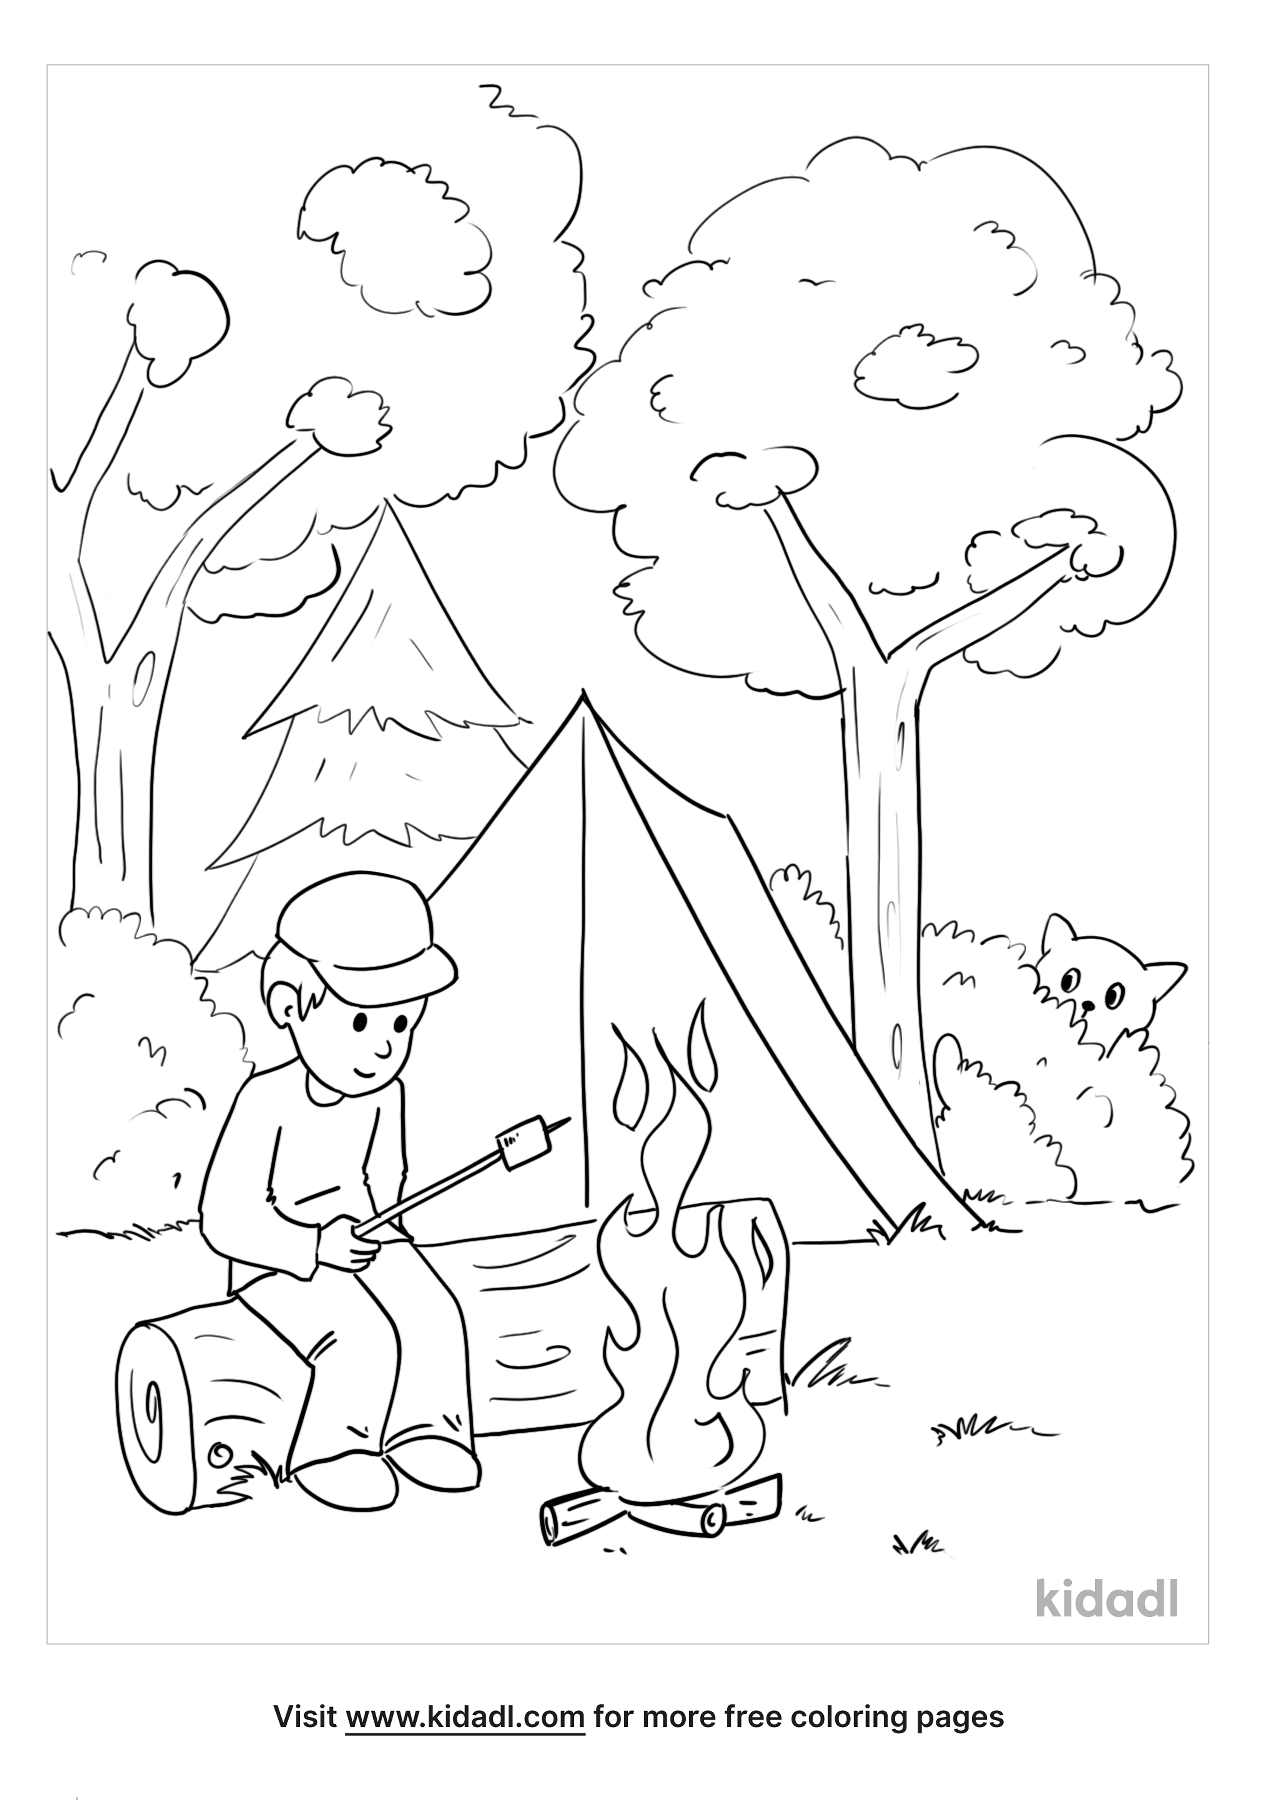 Cat Explorer Camping In Woods Coloring Page